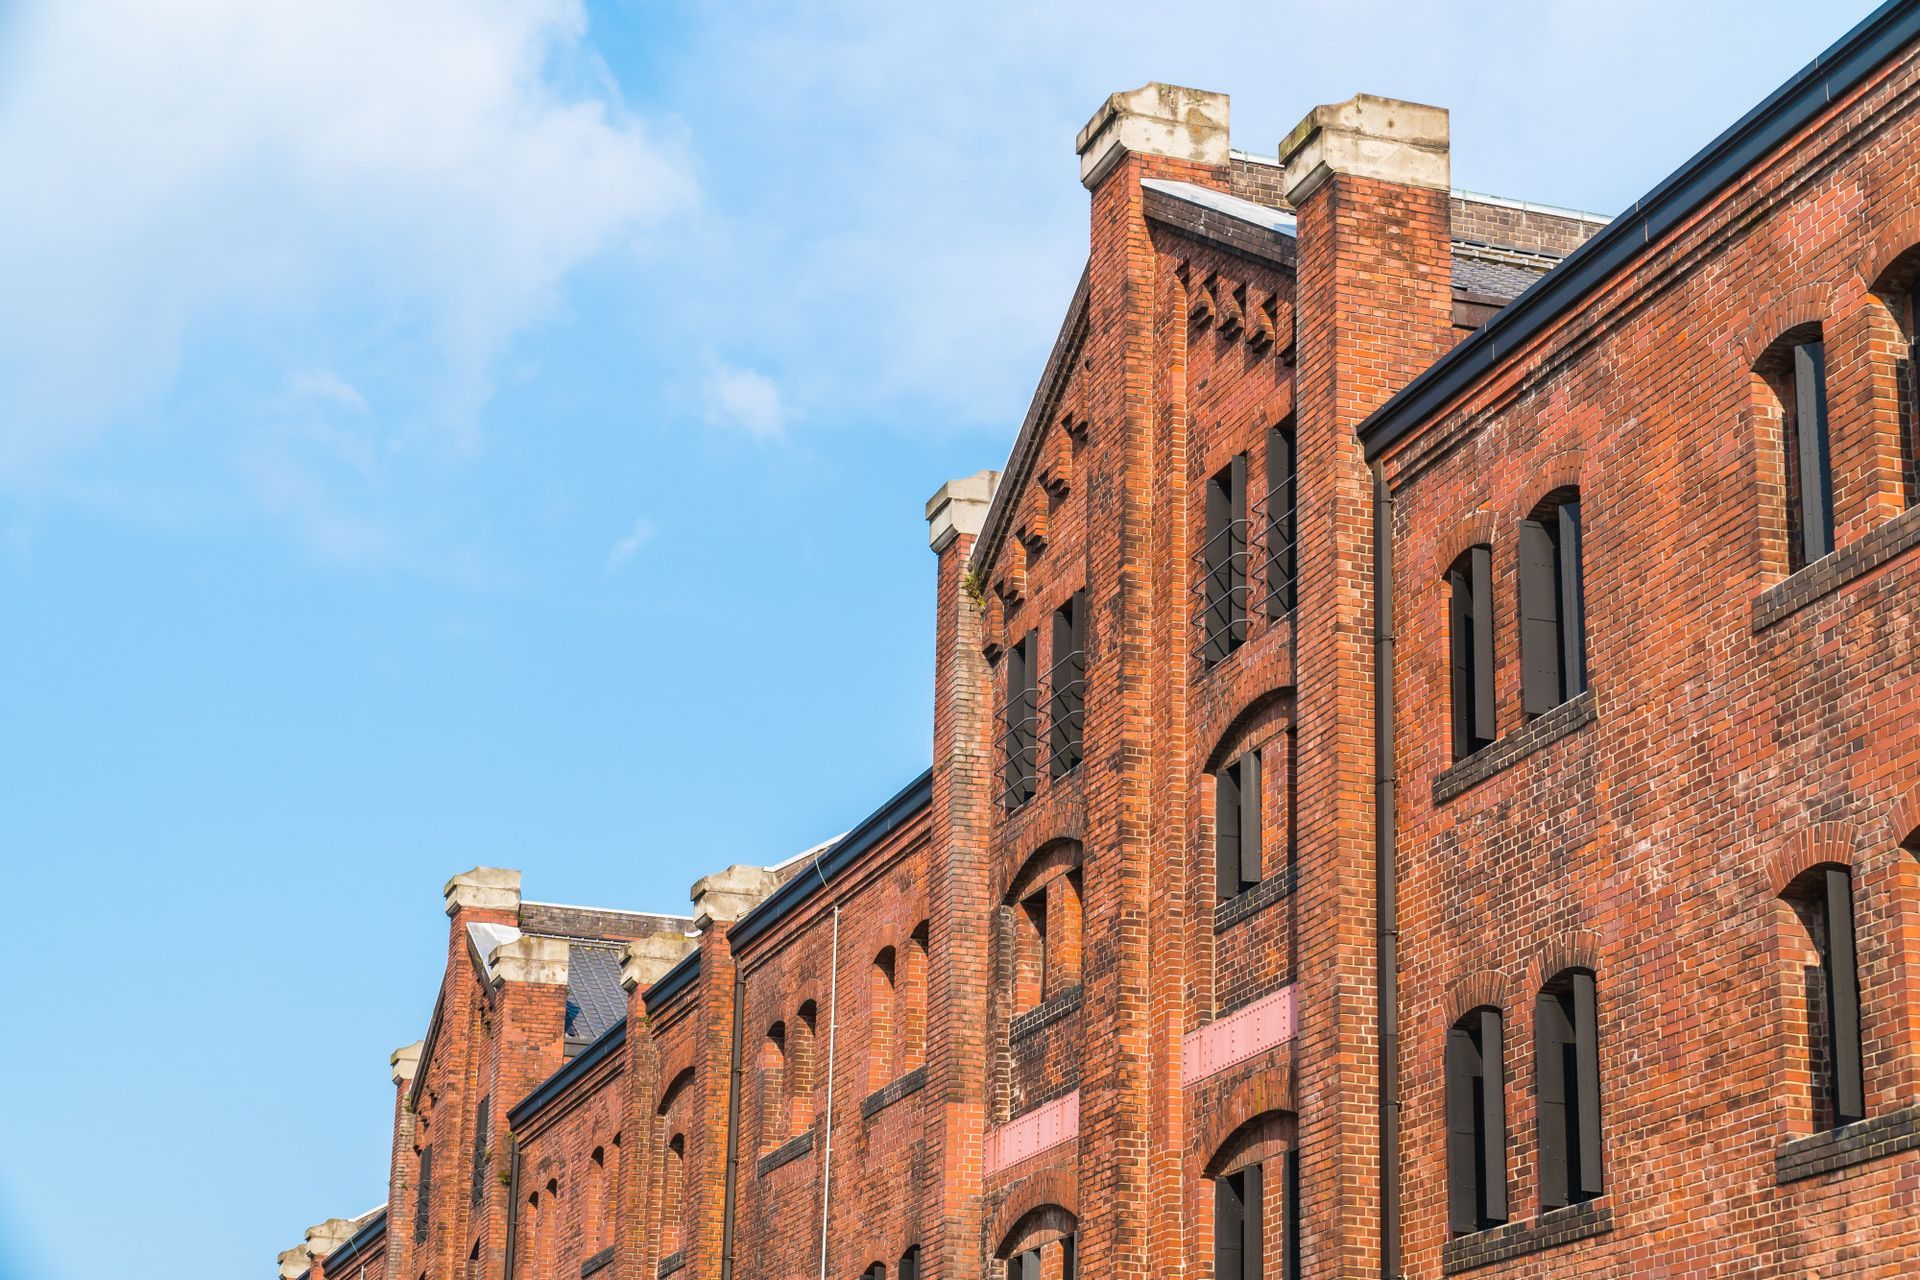 a row of red brick buildings against a blue sky